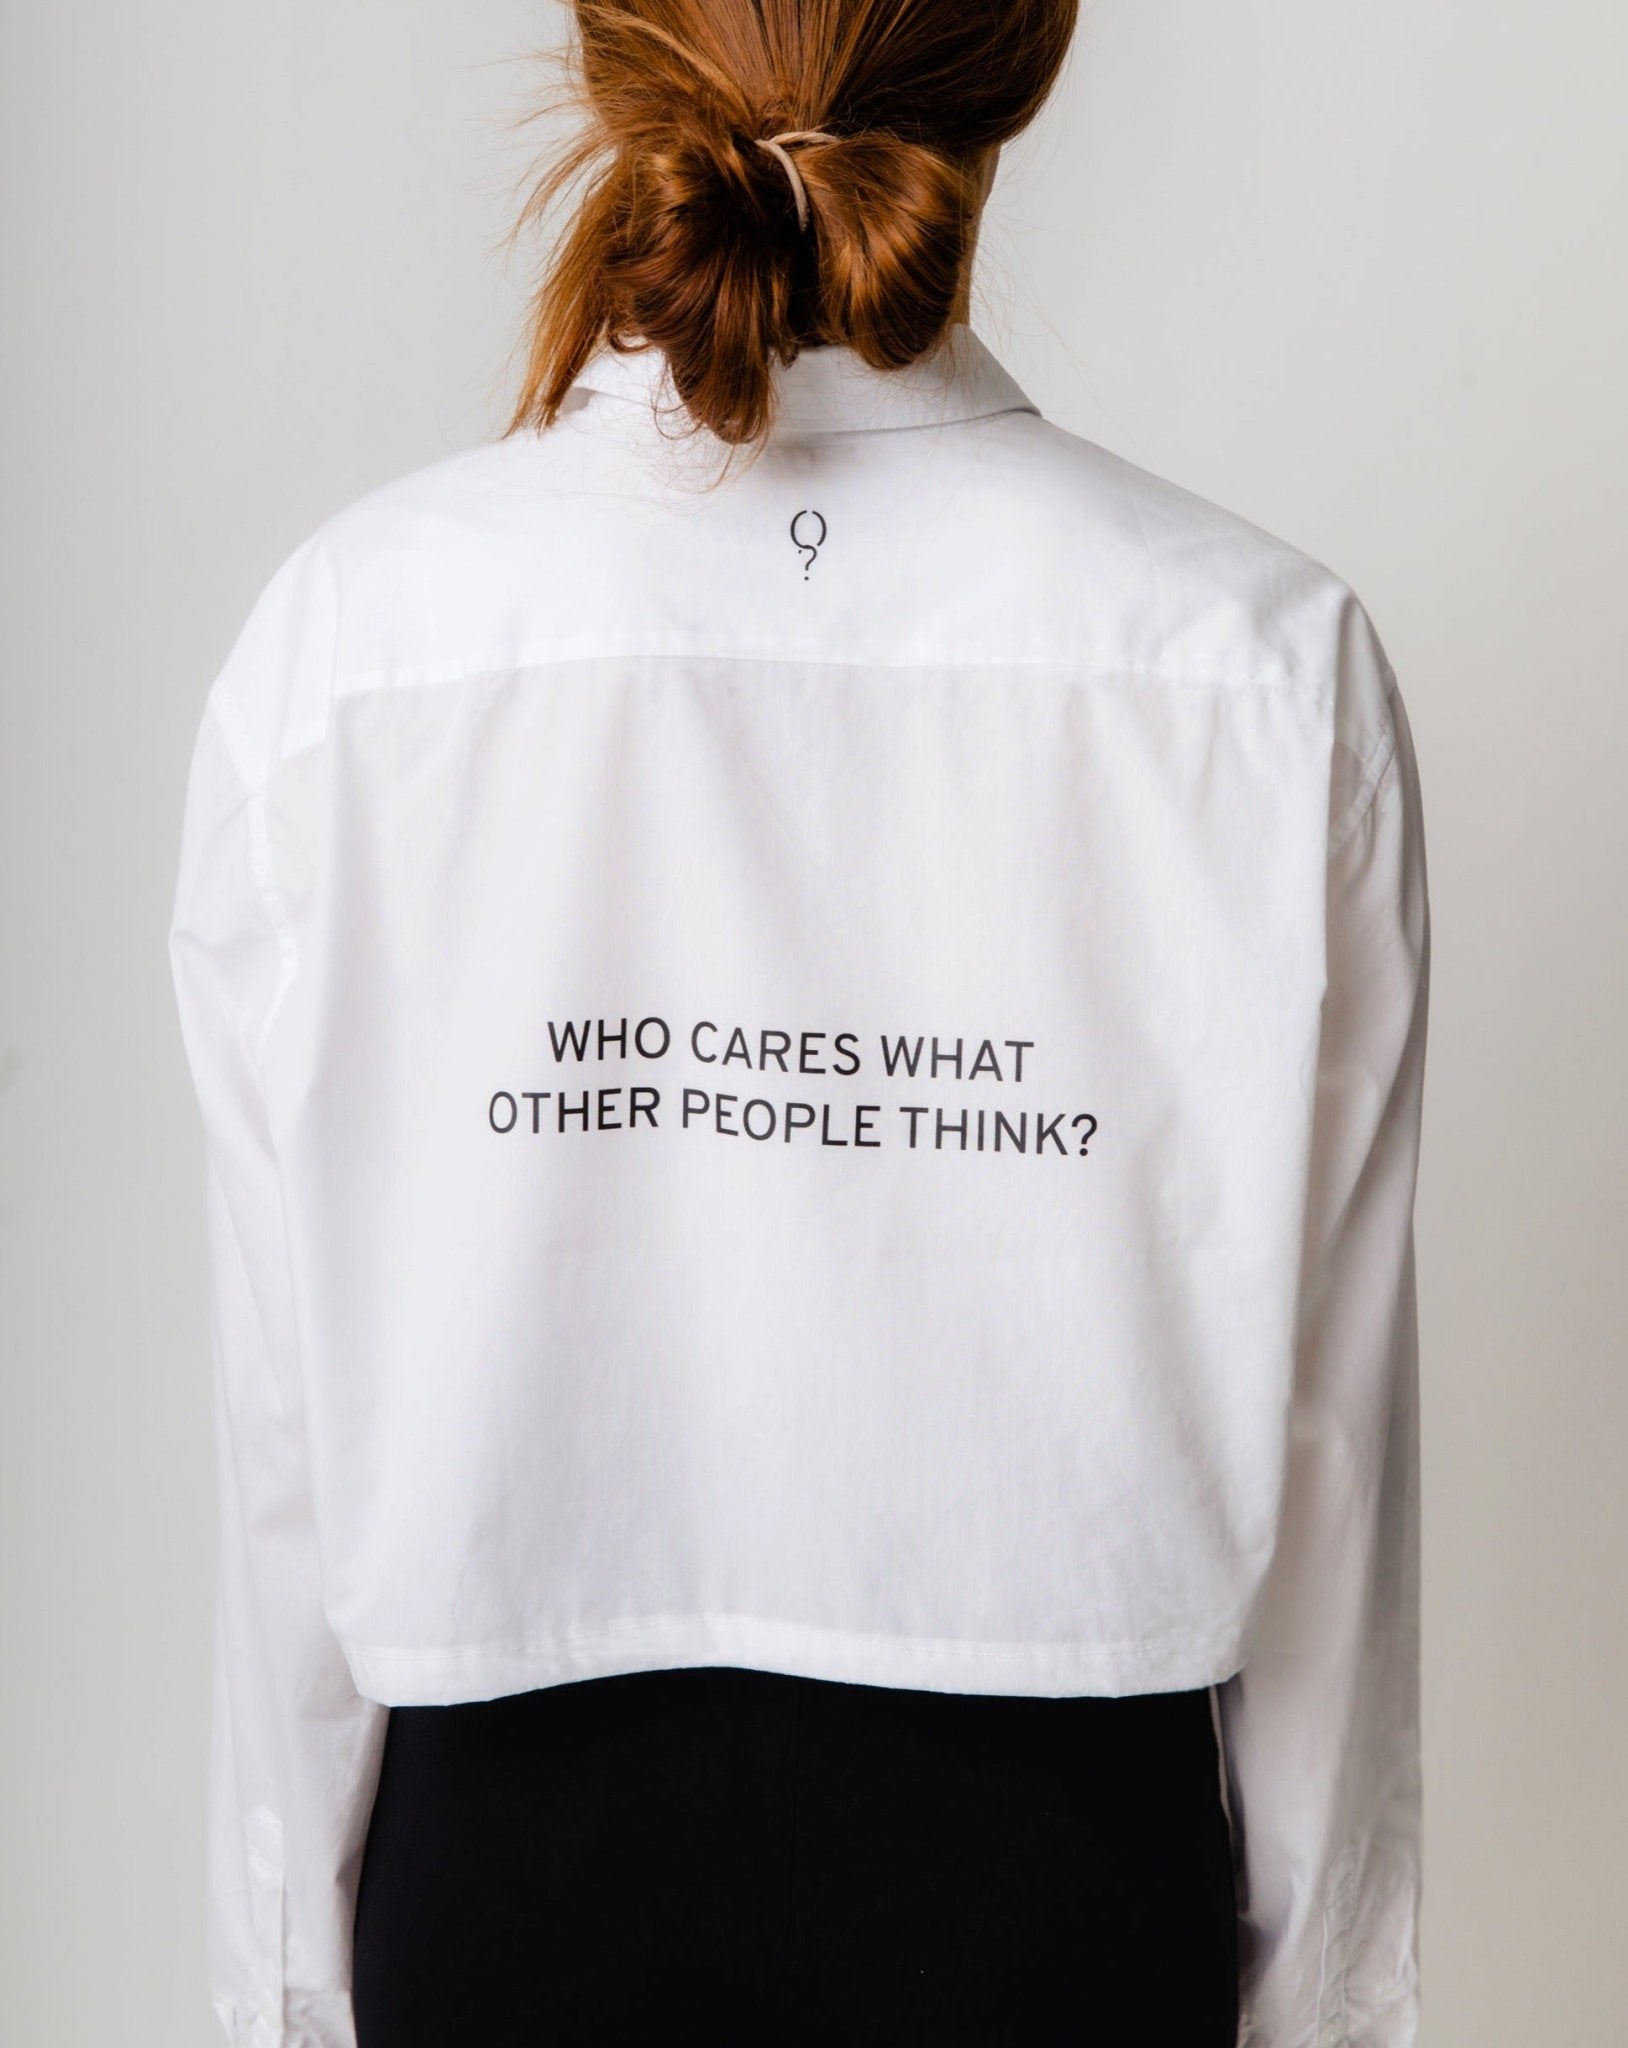 Upcycled White Shirt 'WHO CARES WHAT OTHER PEOPLE THINK?' - OBLIVIOUS?